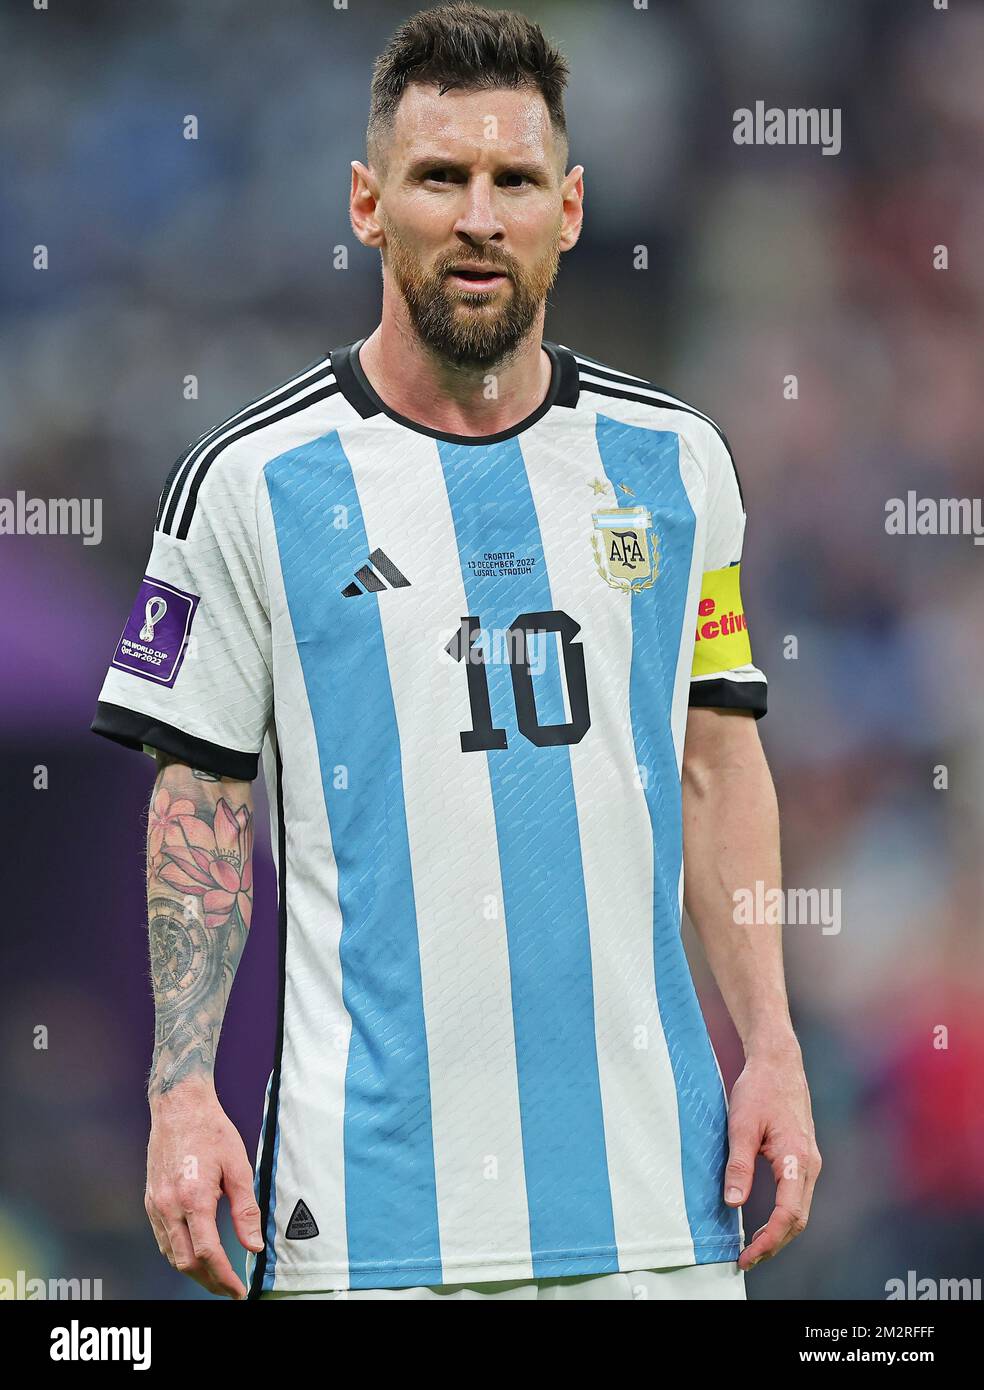 Lionel Messi of Argentina looks ahead during the FIFA World Cup Qatar 2022 match, Semi-final between Argentina and Croatia played at Lusail Stadium on Dec 13, 2022 in Lusail, Qatar. (Photo by Heuler Anbdrey / DiaEsportivo / PRESSIN) Stock Photo